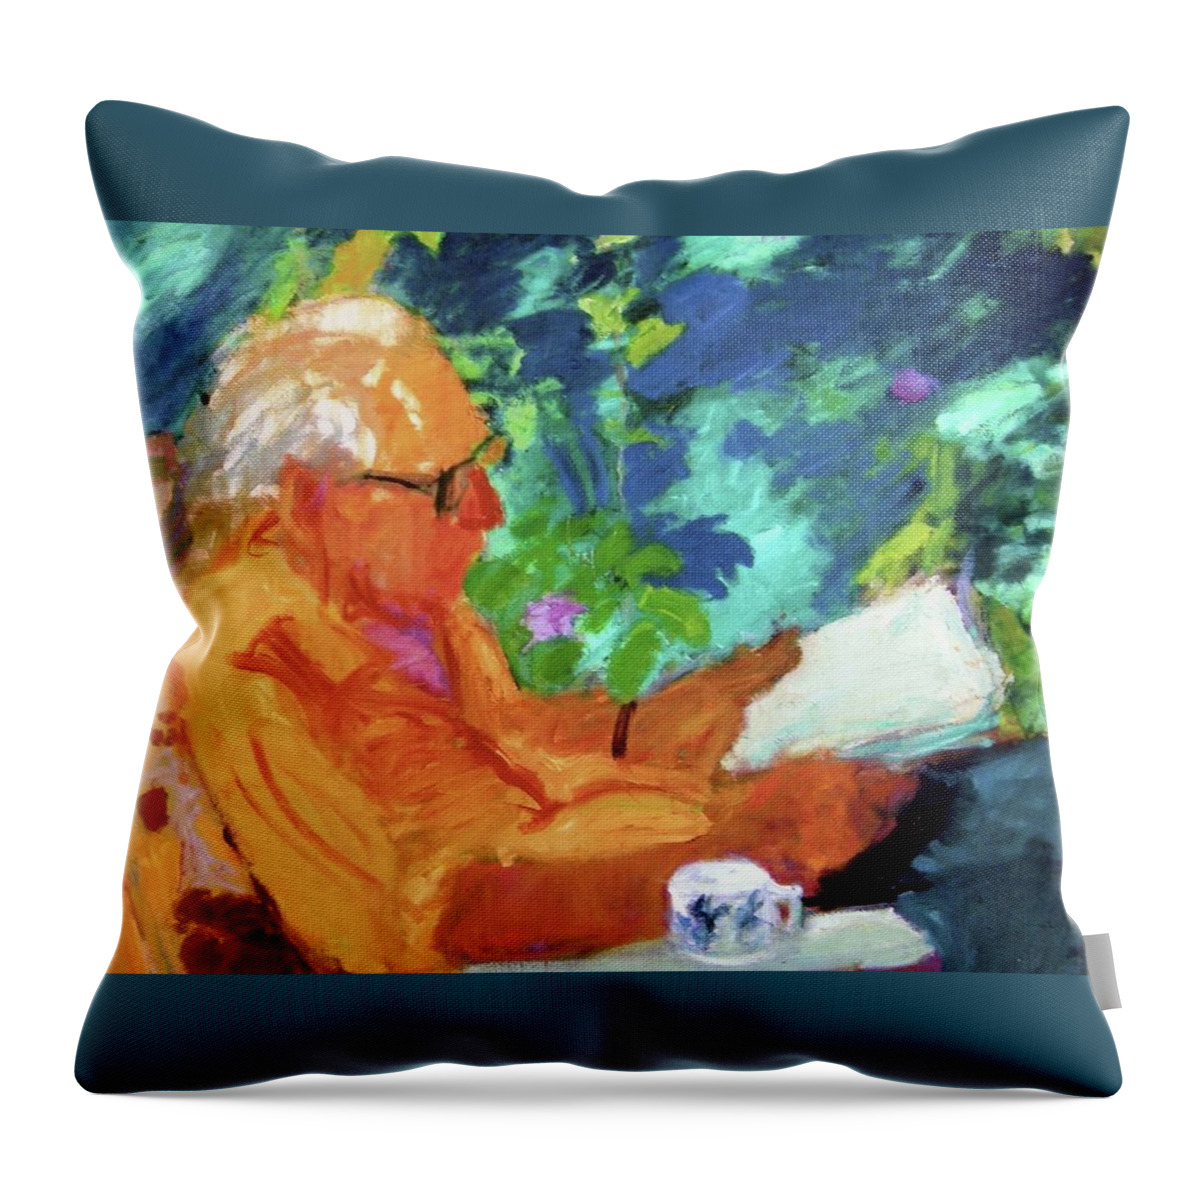 Reading Throw Pillow featuring the painting Yehuda Reading by Galya Tarmu